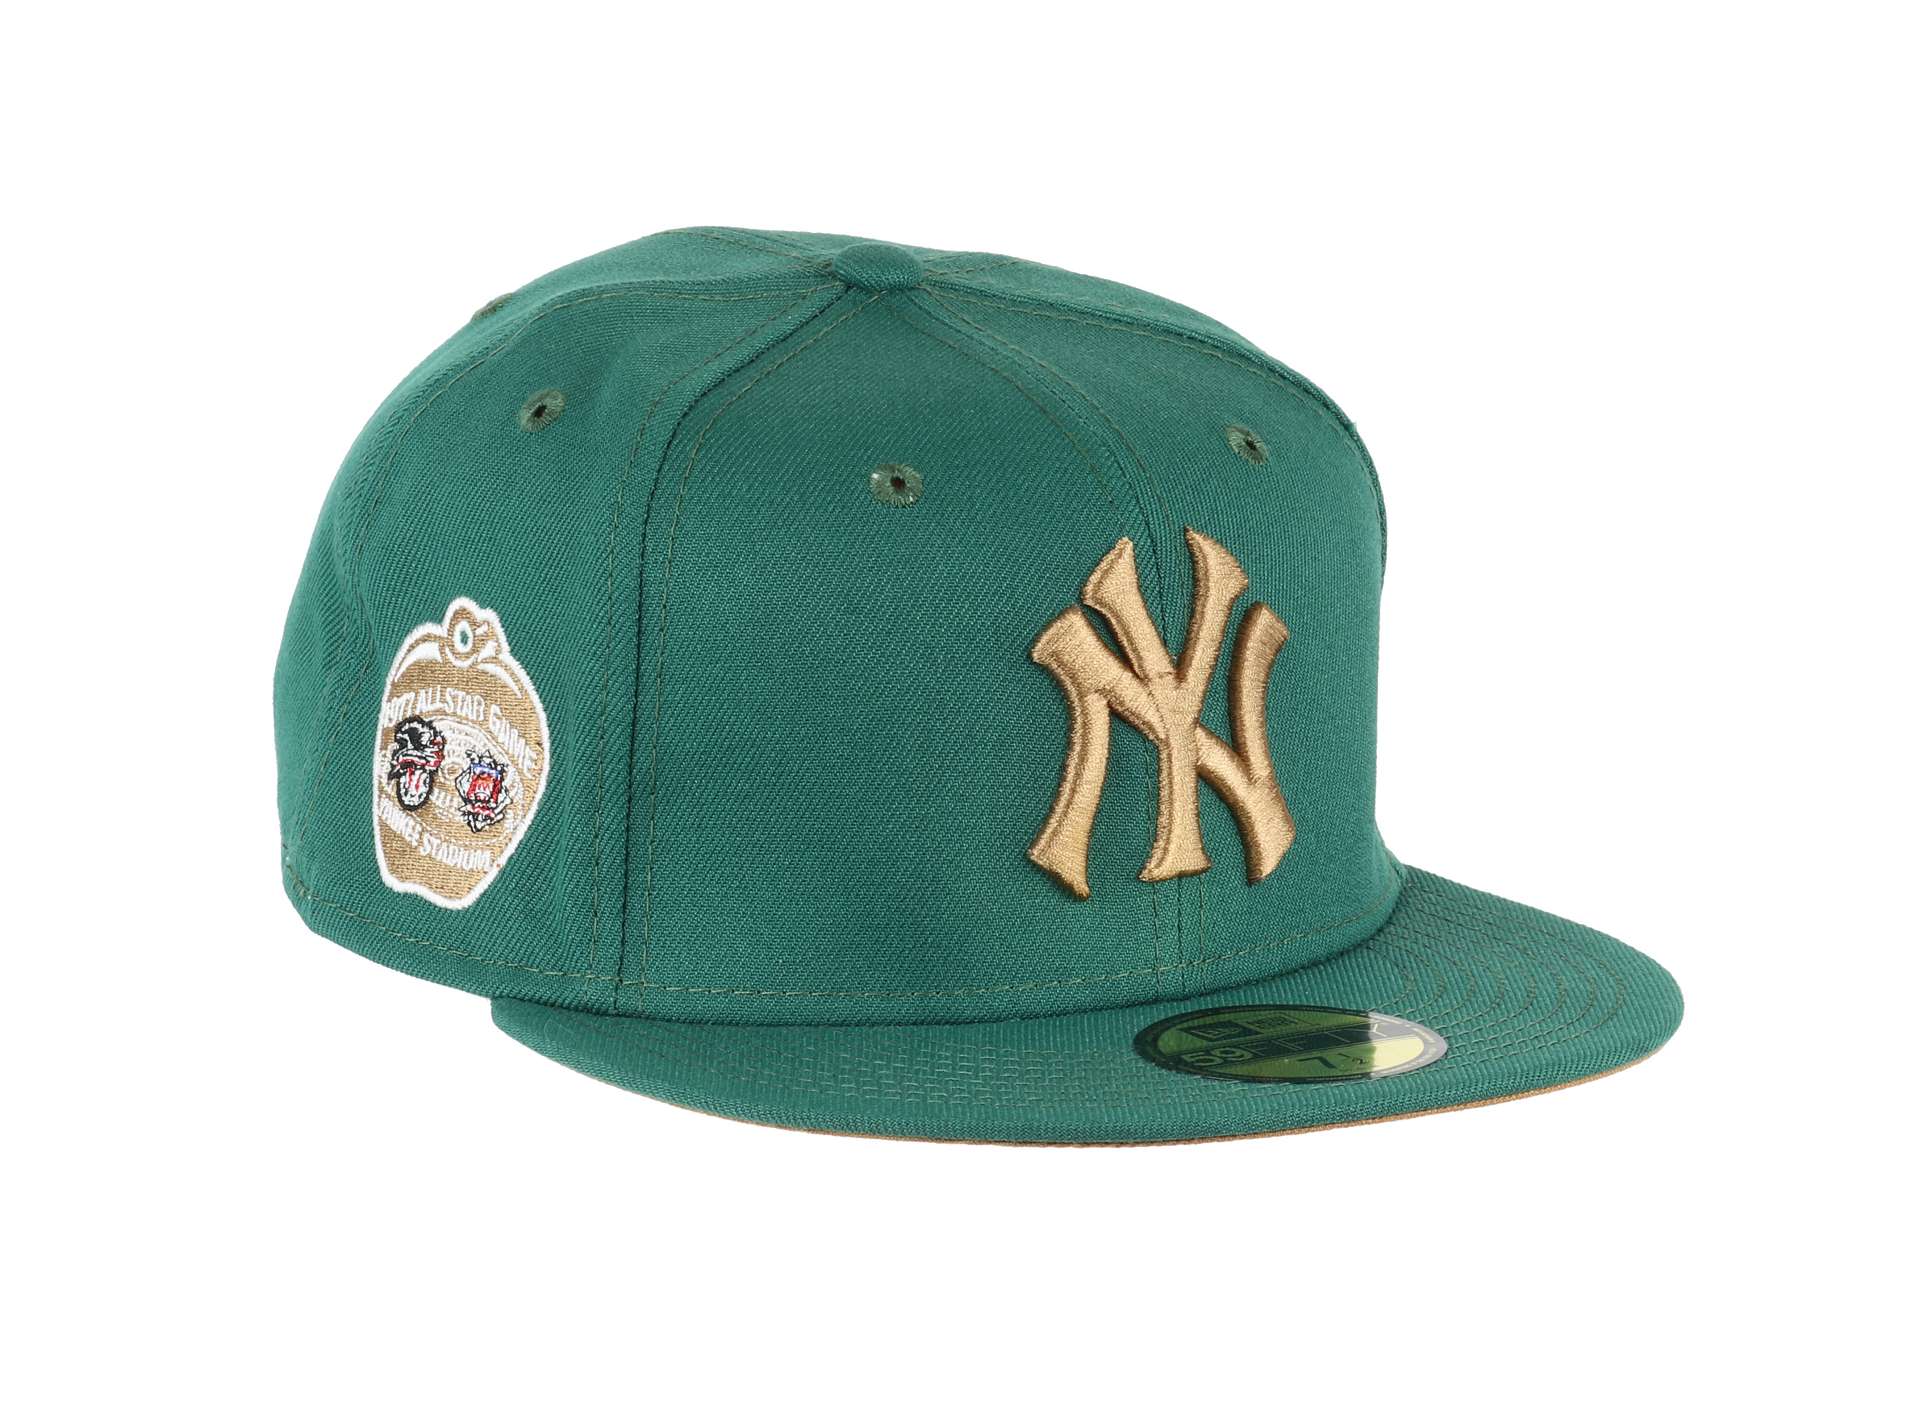 New York Yankees MLB Cooperstown All-Star Game 1977 Sidepatch Emerald Green 59Fifty Basecap New Era